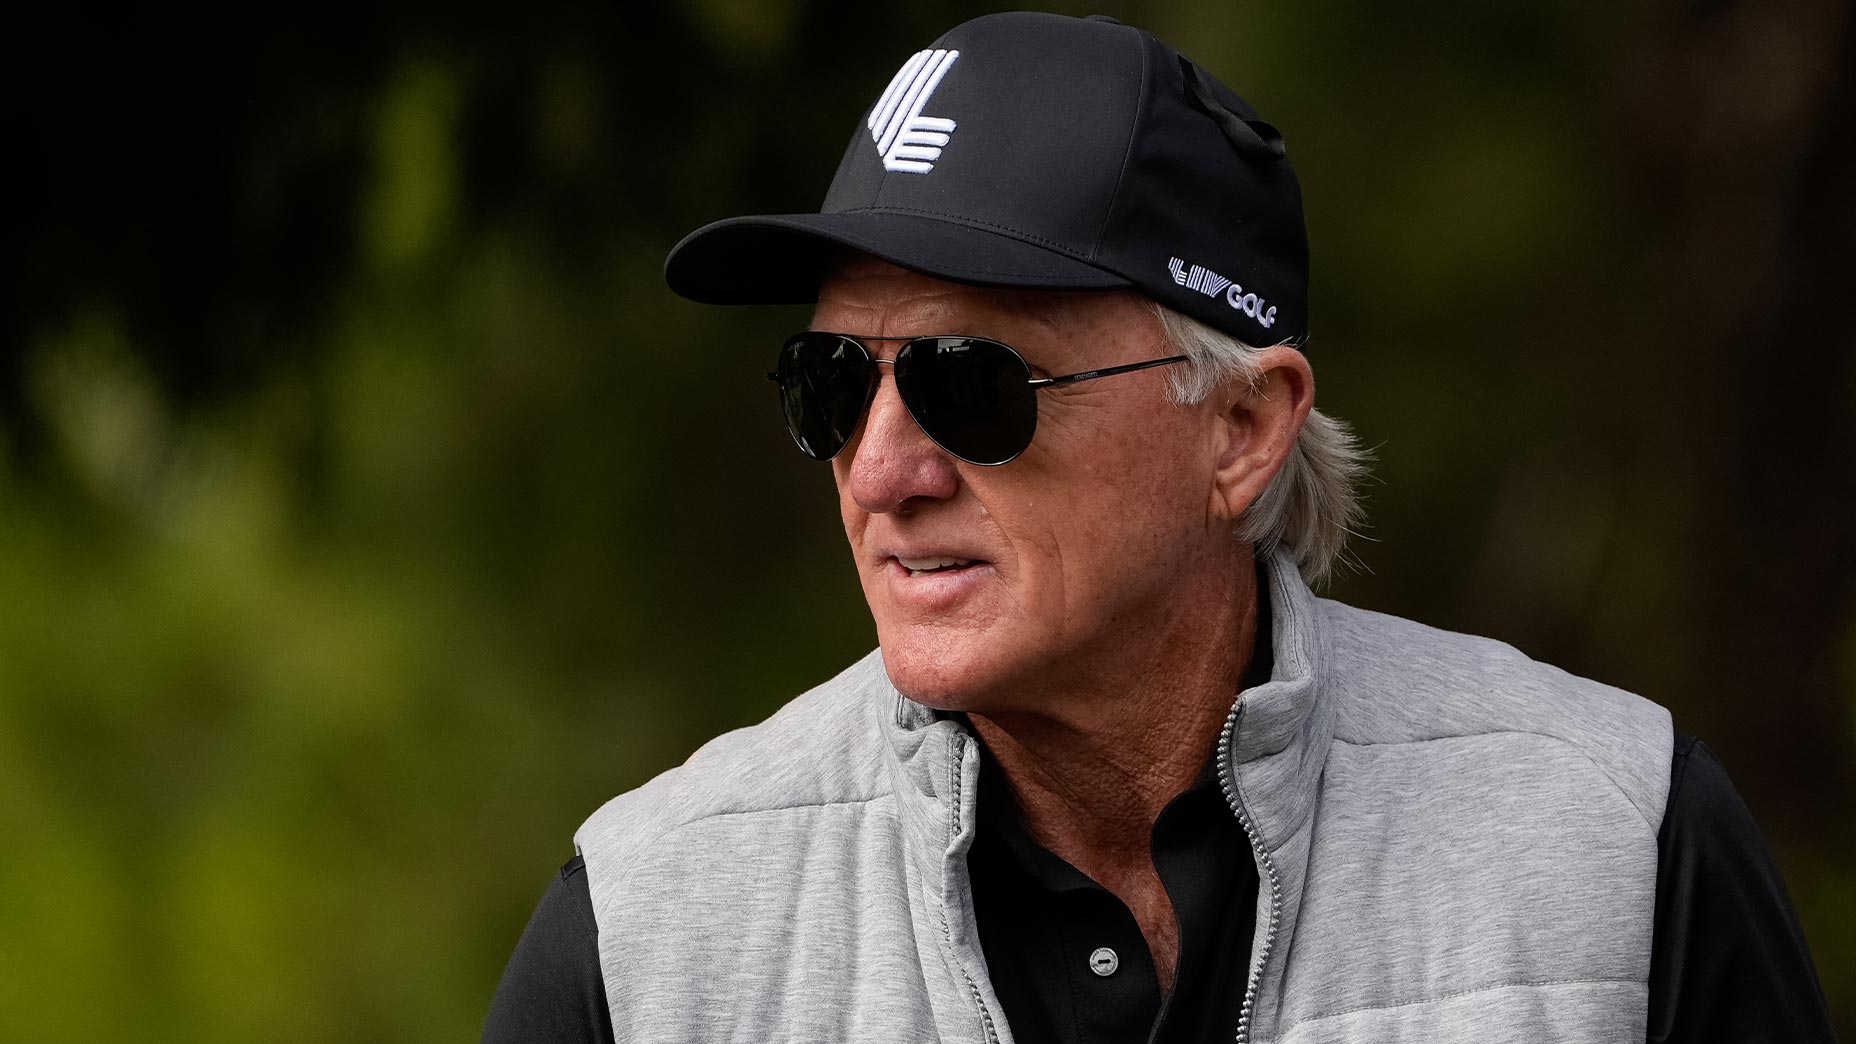 greg norman stares at LIV Golf event in grey vest and black hat